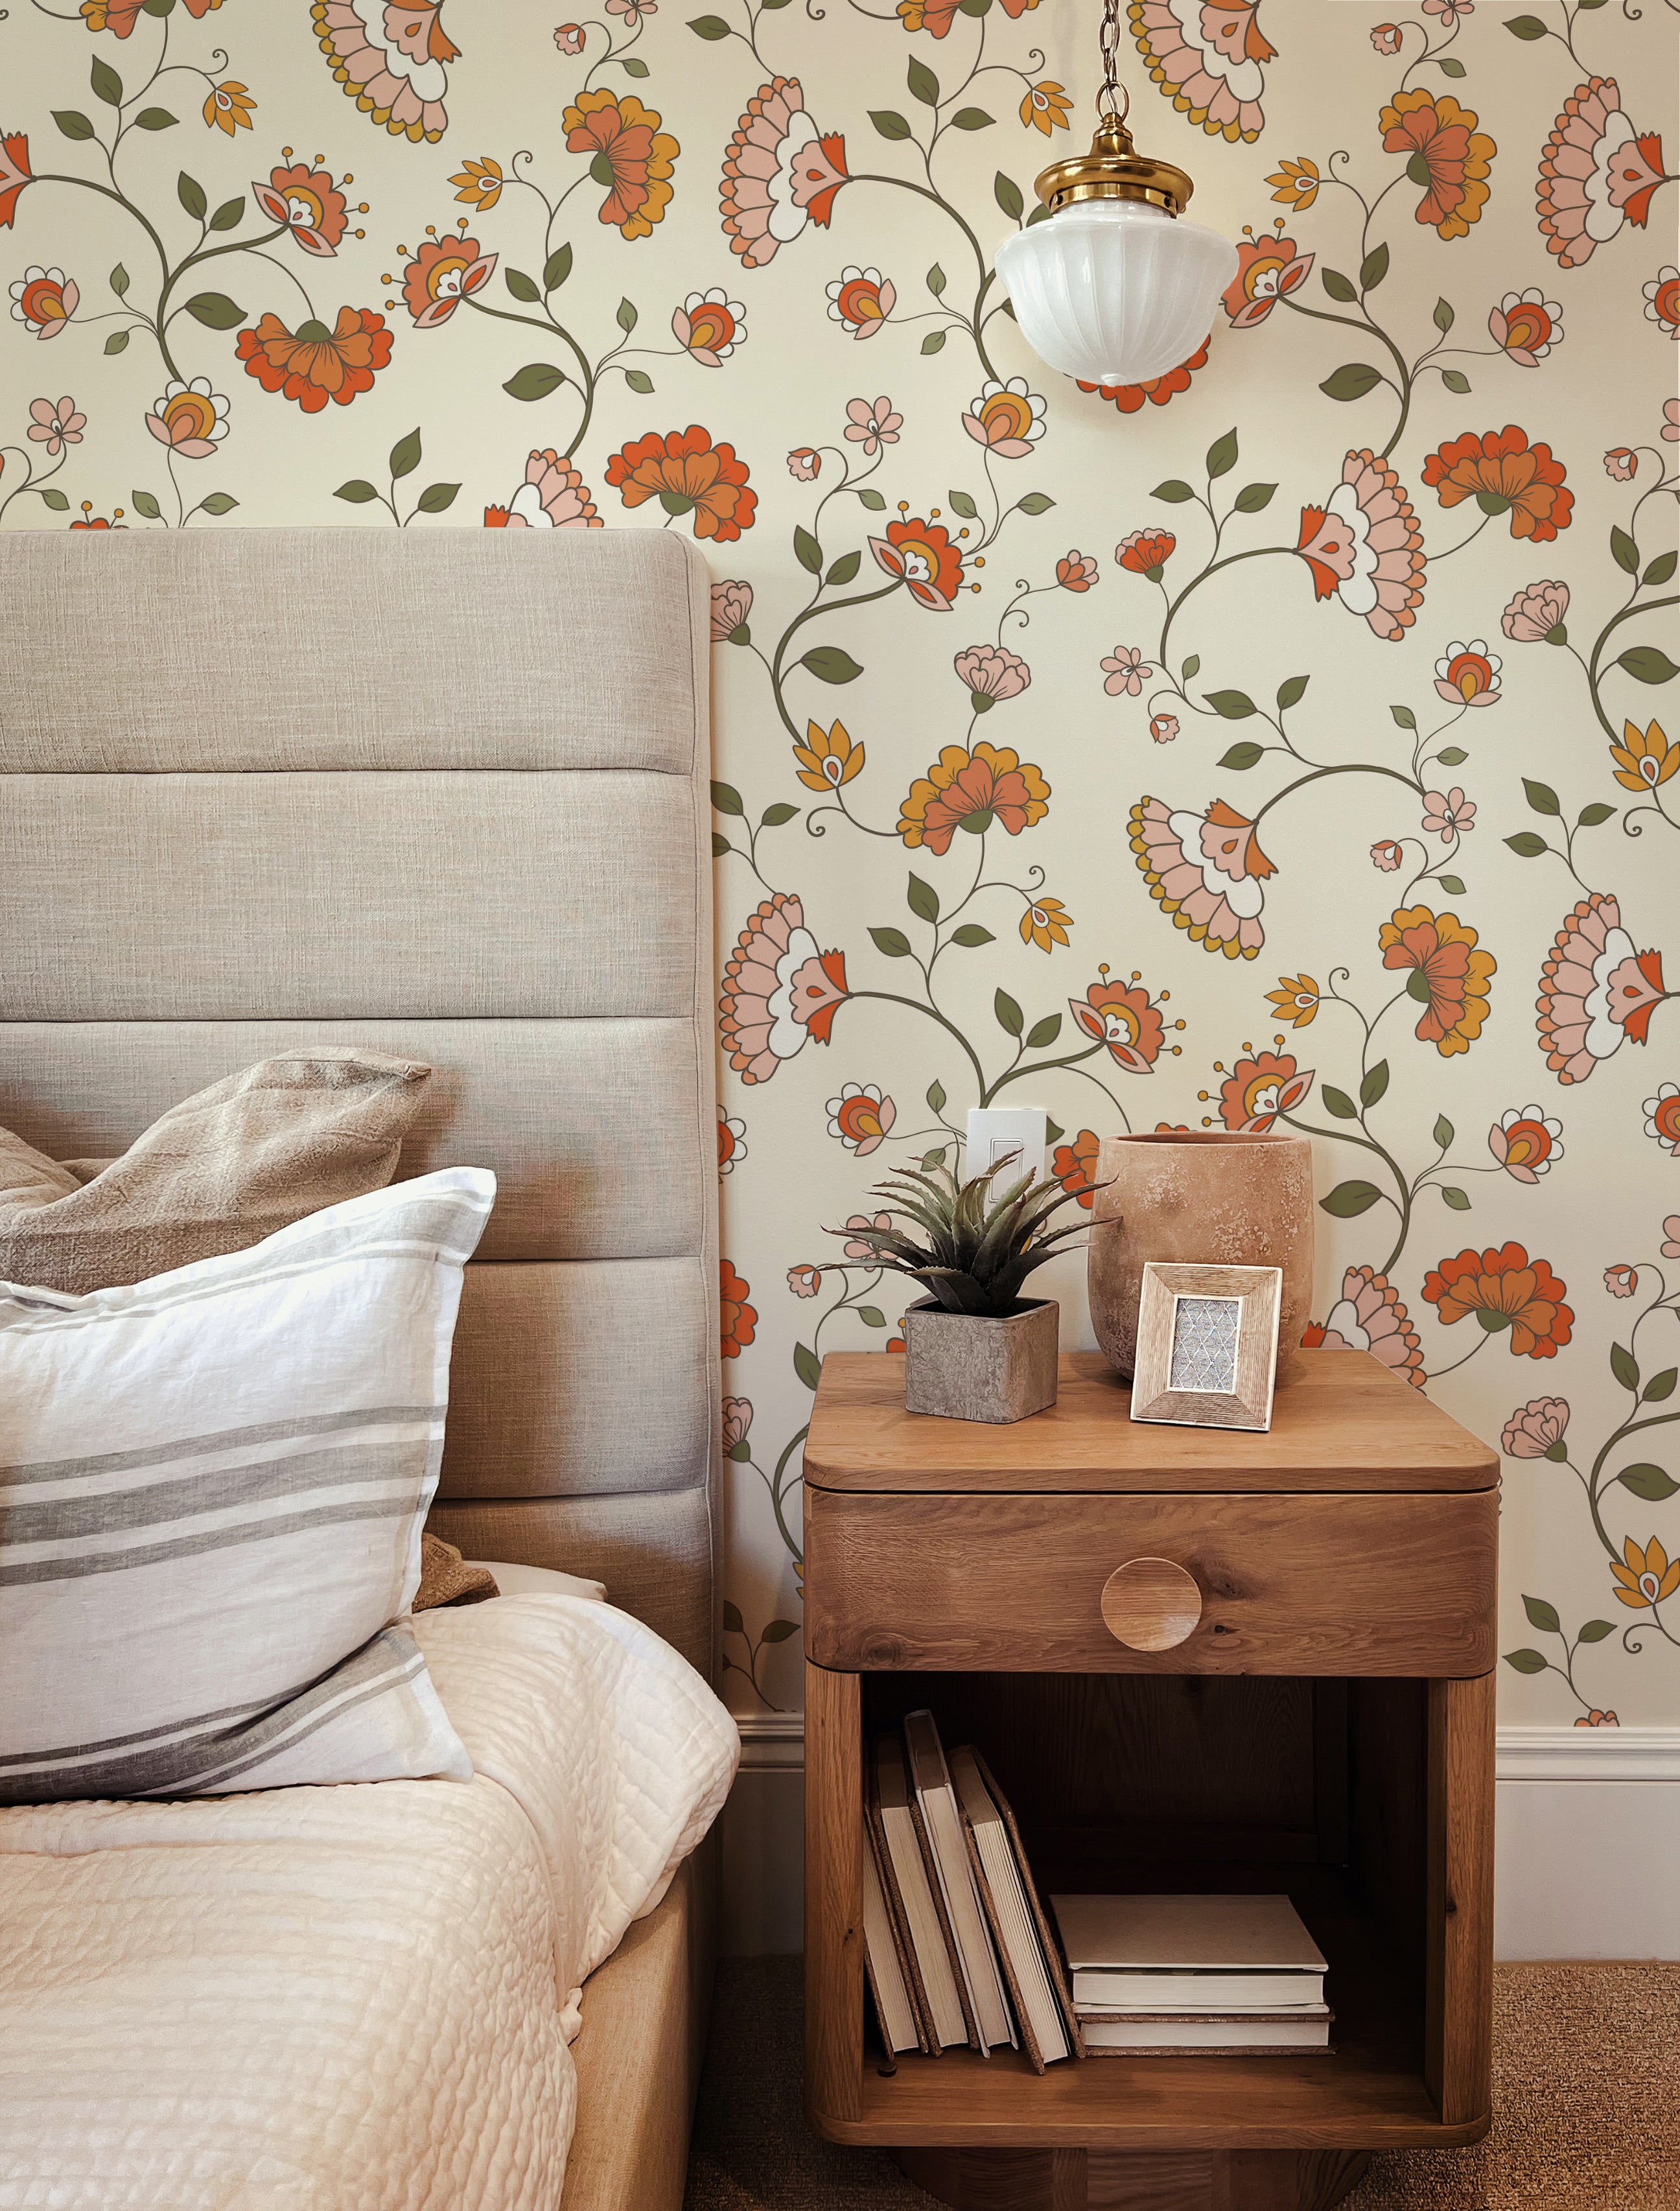 An elegant bedroom corner showcasing a tall, fabric-upholstered headboard against a vibrant Retro Pattern Wallpaper with a floral design featuring orange and pink blooms intertwined with green foliage. A wooden bedside table with a potted succulent, a square terracotta vase, and a small photo frame sits adjacent to the bed